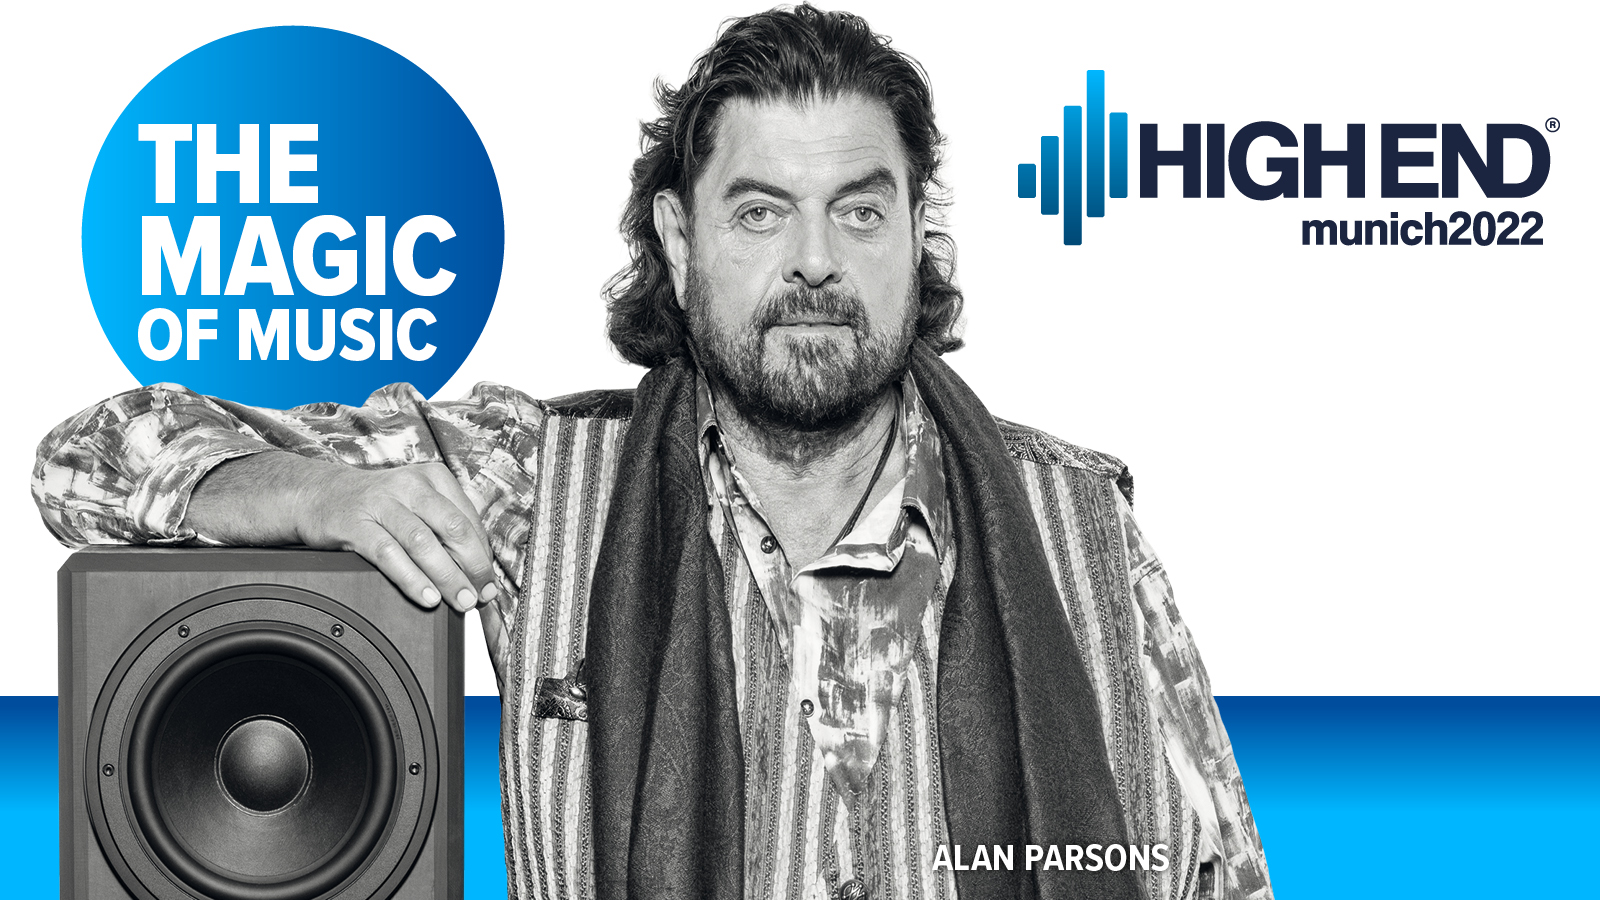 Alan Parsons as brand ambassador of the High End 2022 (Image Credit: HIGH END SOCIETY Service GmbH)